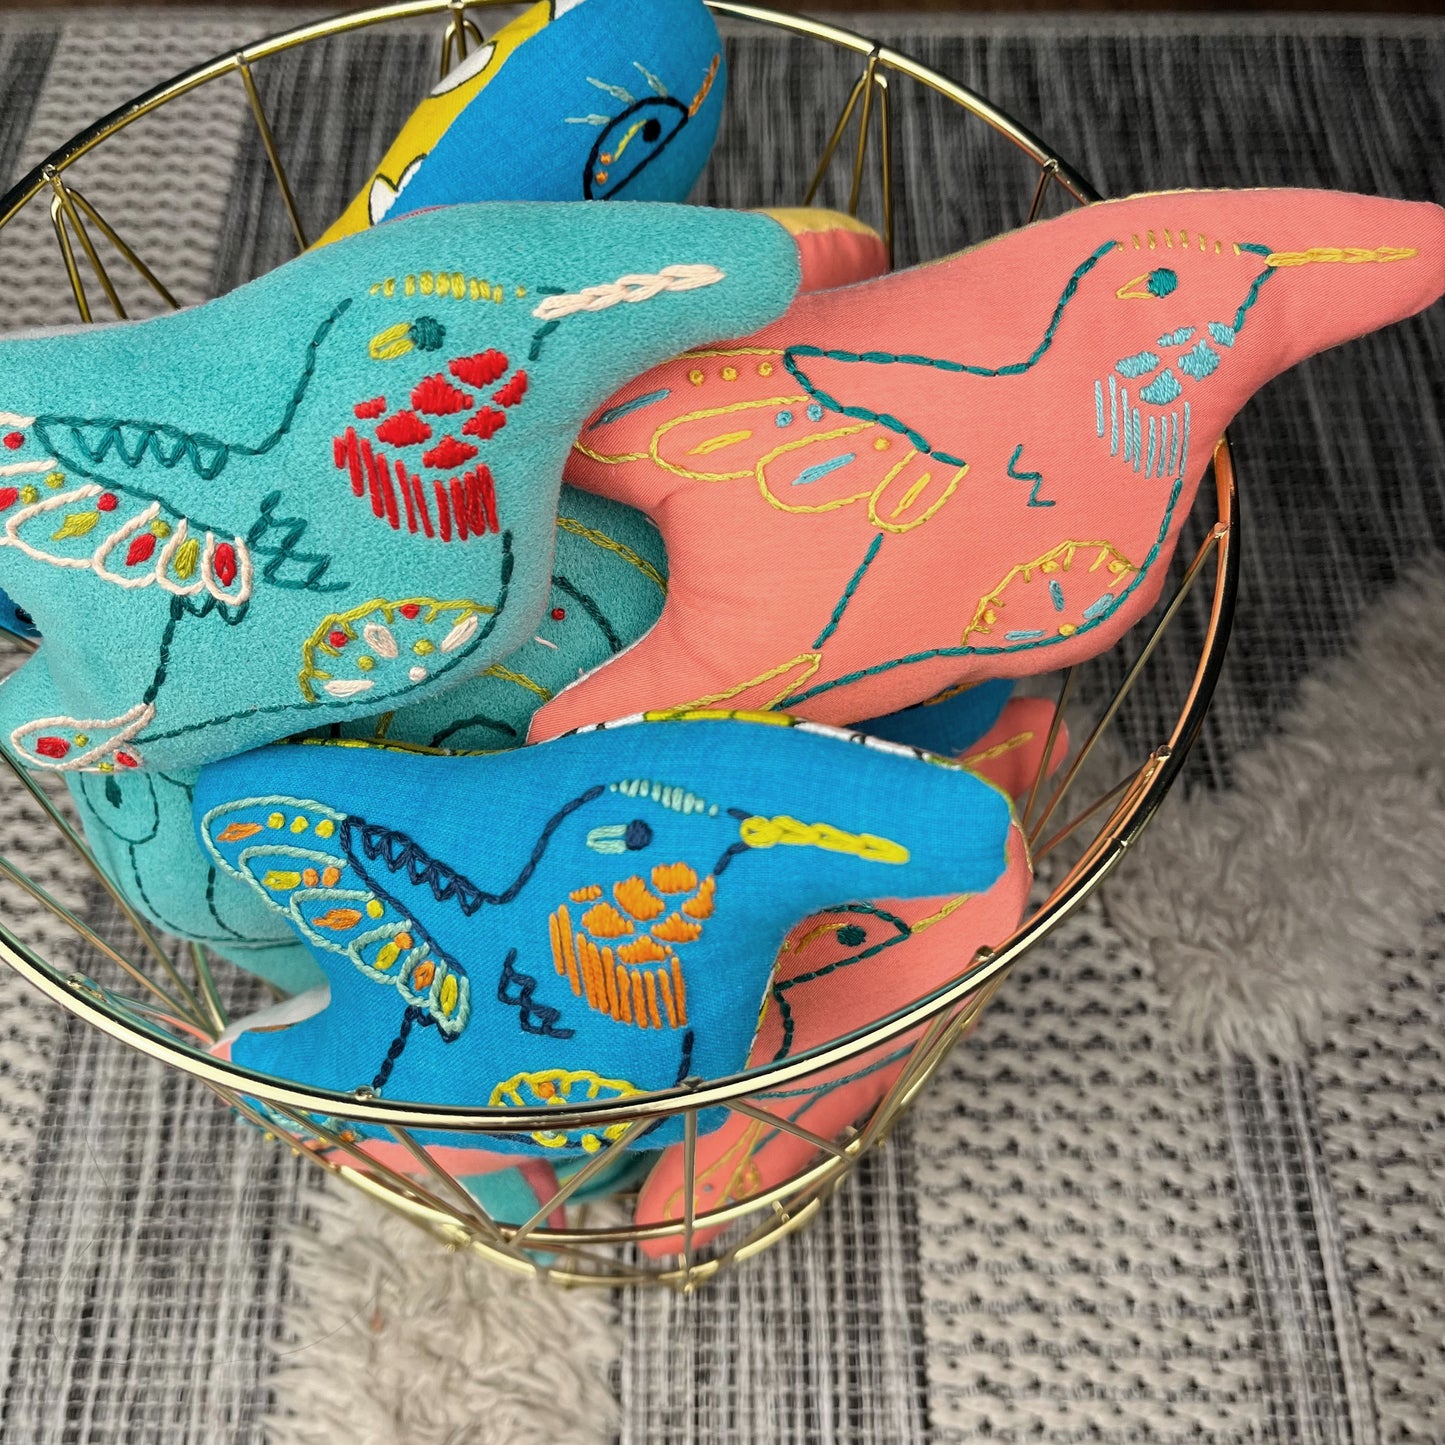 a group of colorfully hand embroidered stuffed pillow hummingbirds in blue, aqua and coral fabric, in a gold wire basket on a textured grey and white rug